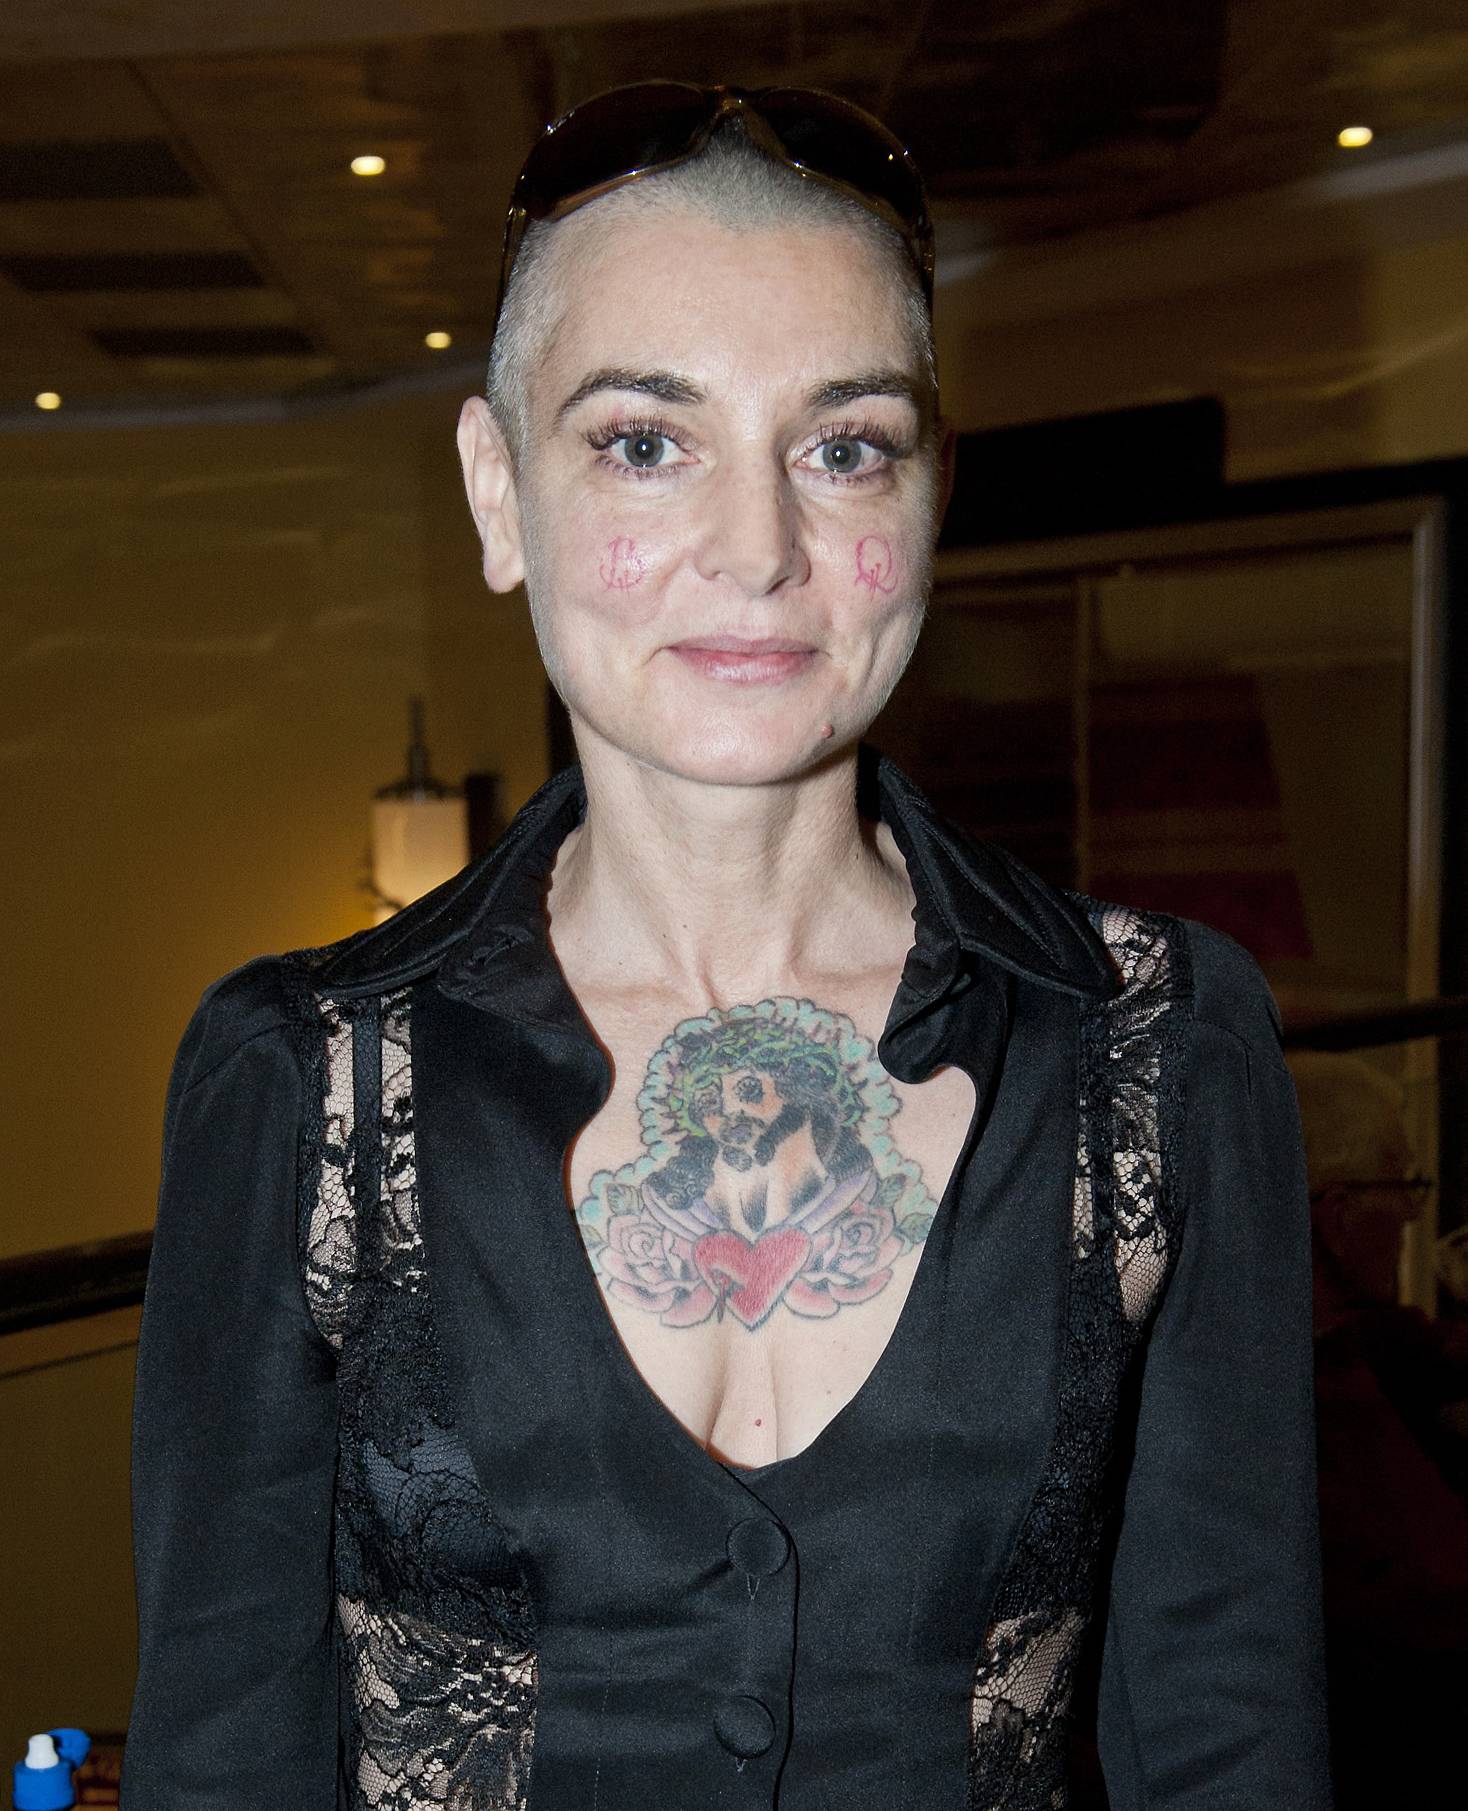 Sinead O'Connor spotted back in Ireland in 'good spirits' - Goss.ie